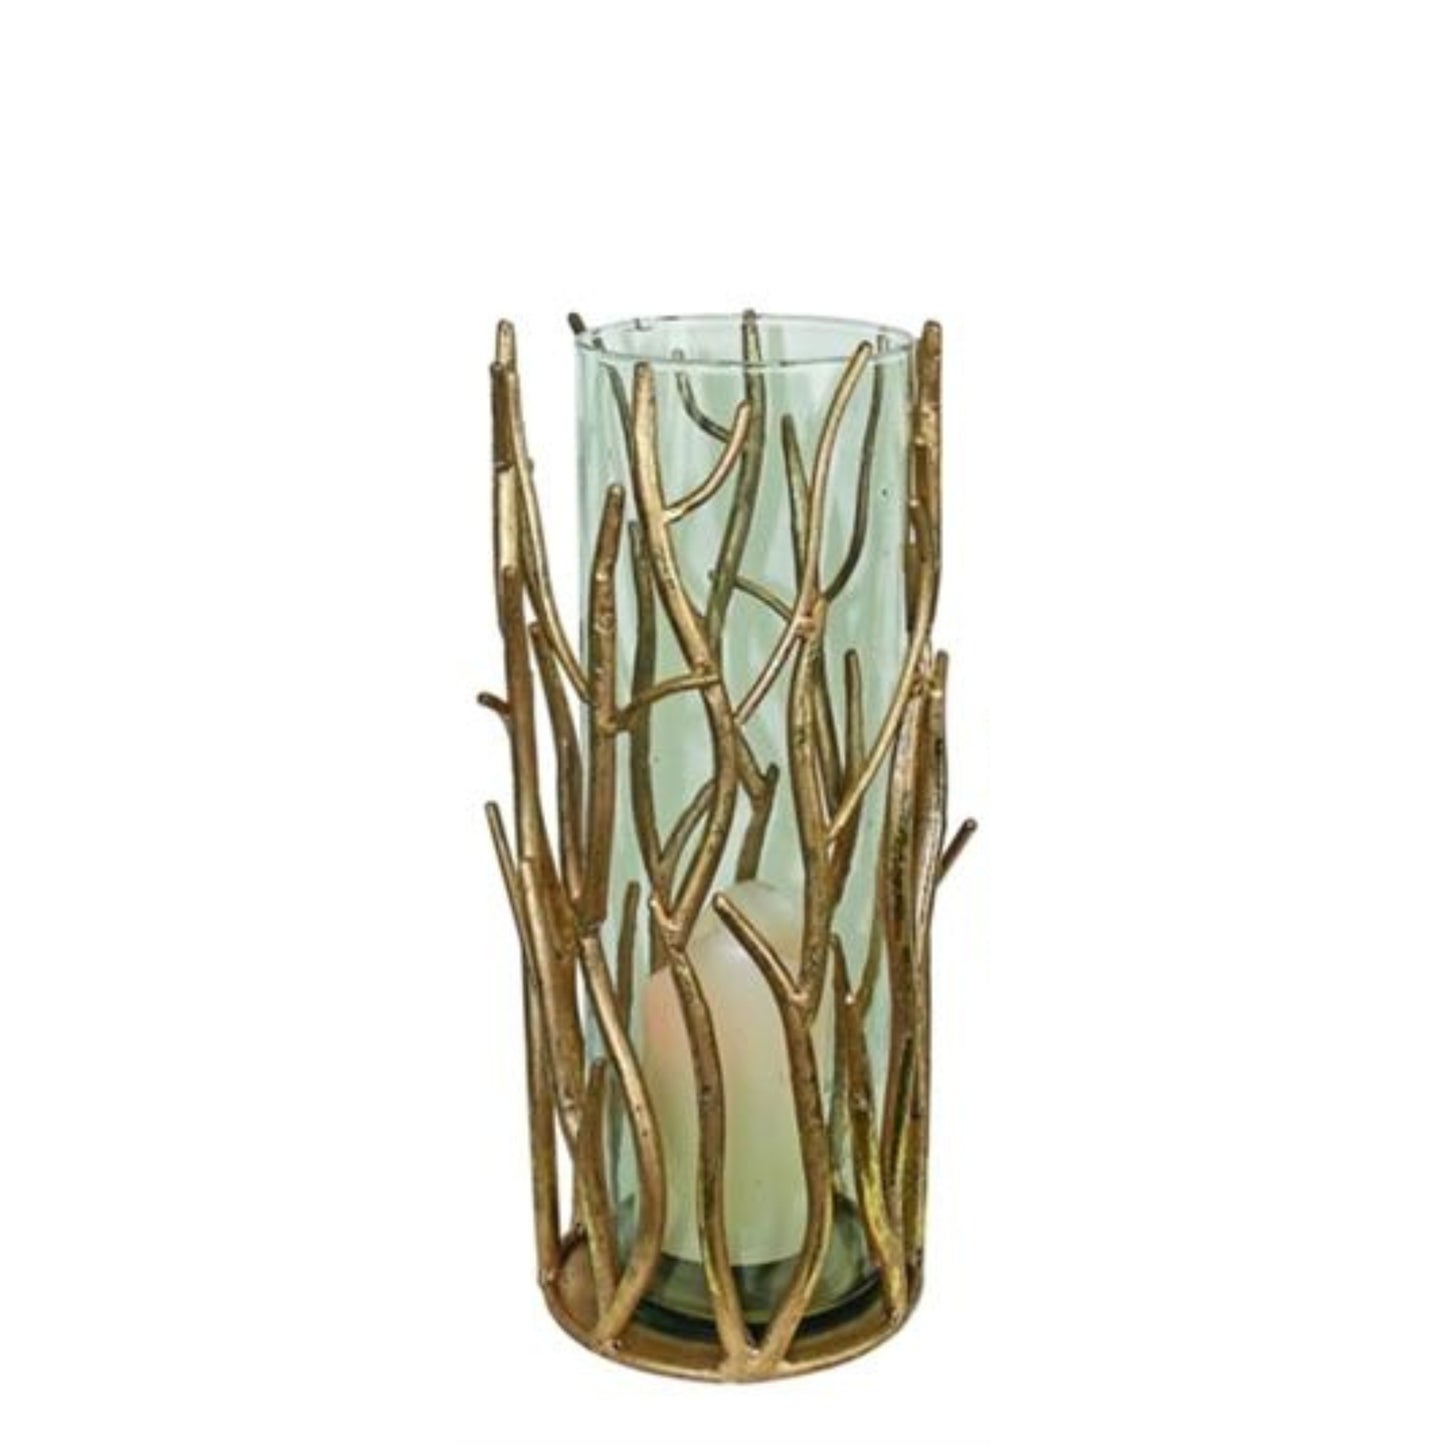 Italian Gold Iron Hurricanes - Twig Accent Iron & Glass Candle Holders - 3 Sizes to Choose From (Medium Candle Holder pictured) | Beautiful estate quality home decor | INSIDE OUT | InsideOutCatalog.com